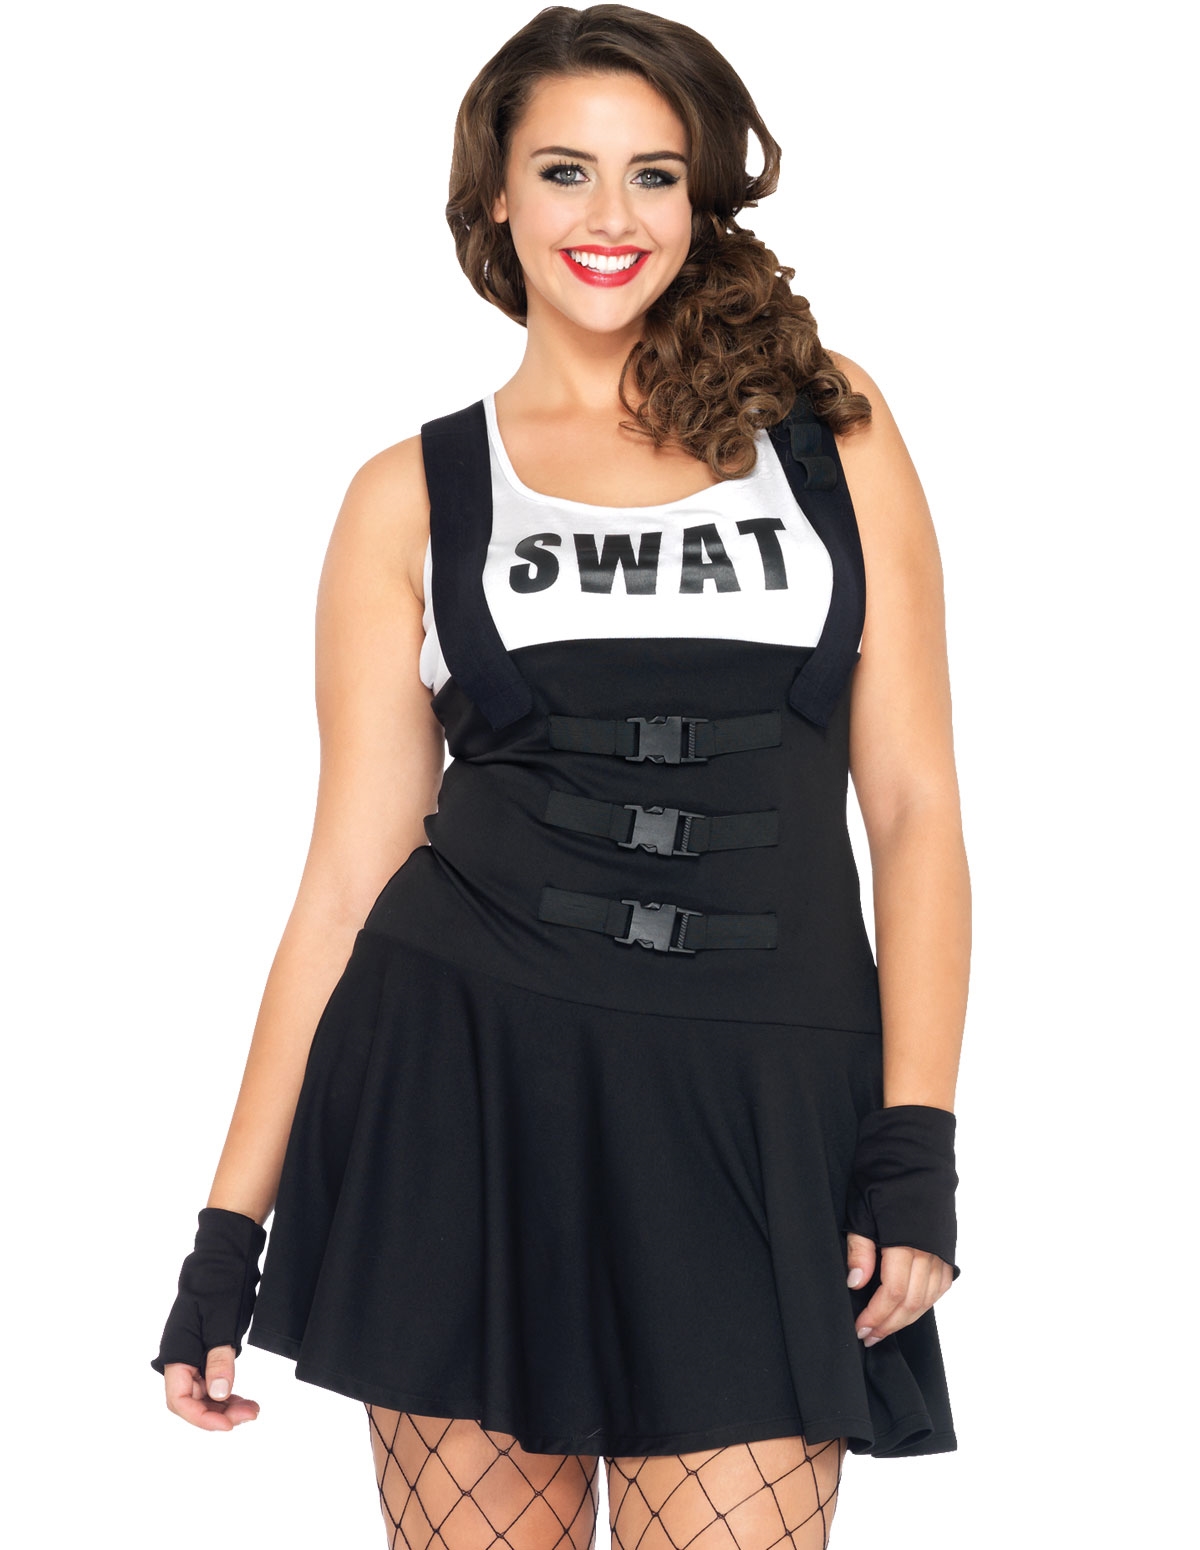 alternate image for Sultry Swat Costume